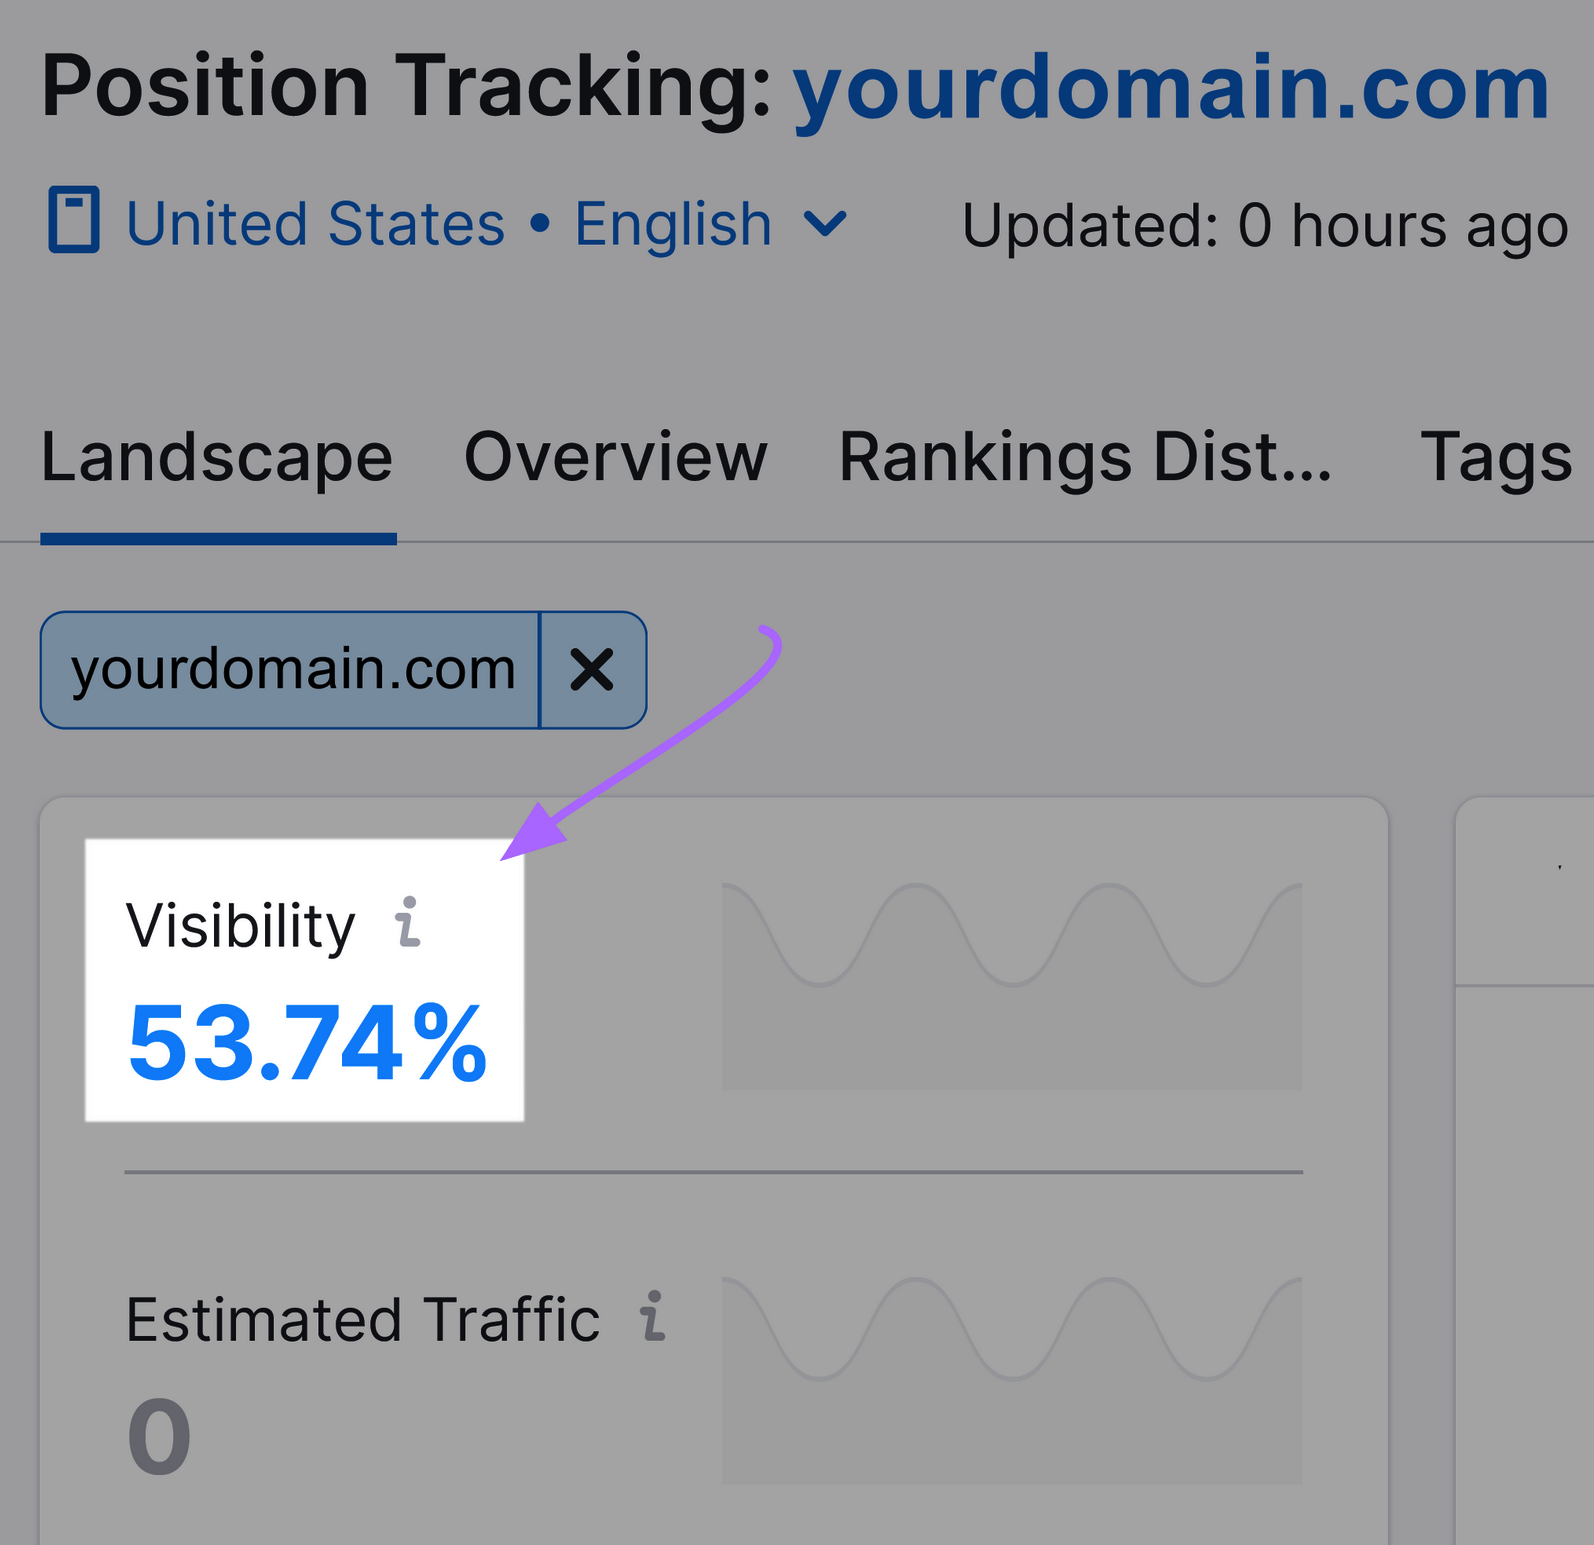 "Visibility" widget showing "53.74%" in Position Tracking landscape report